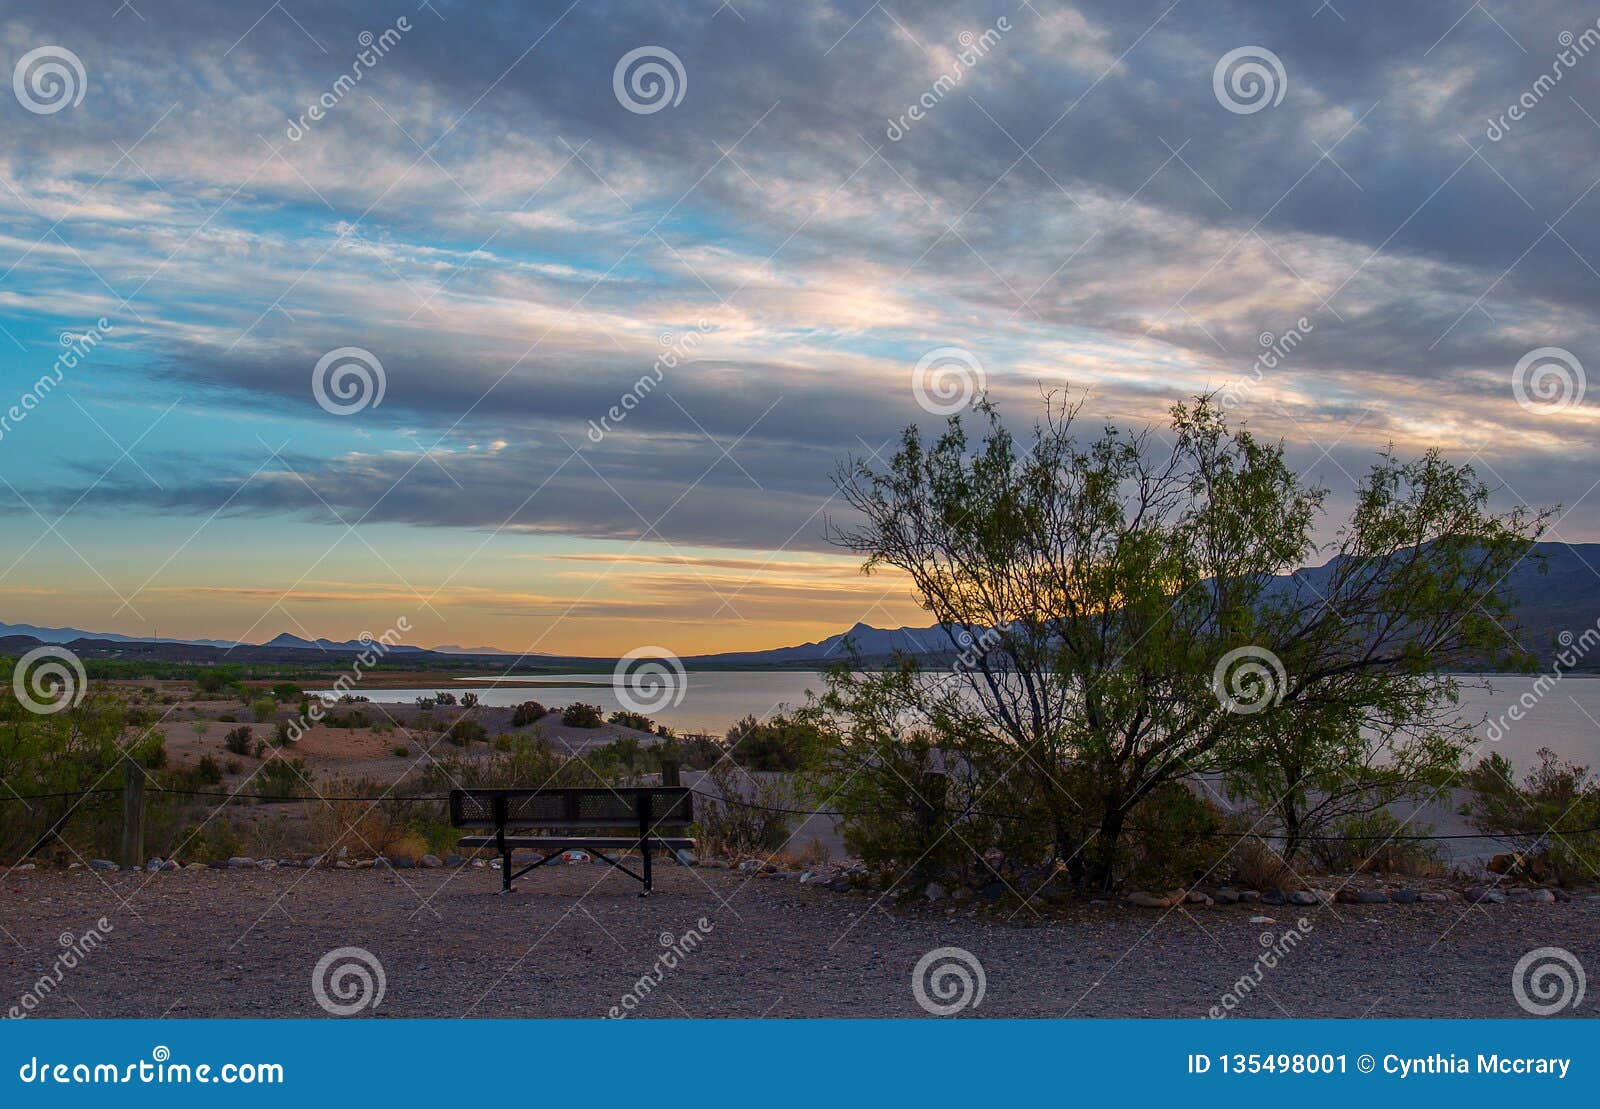 sunset over caballo lake in new mexico